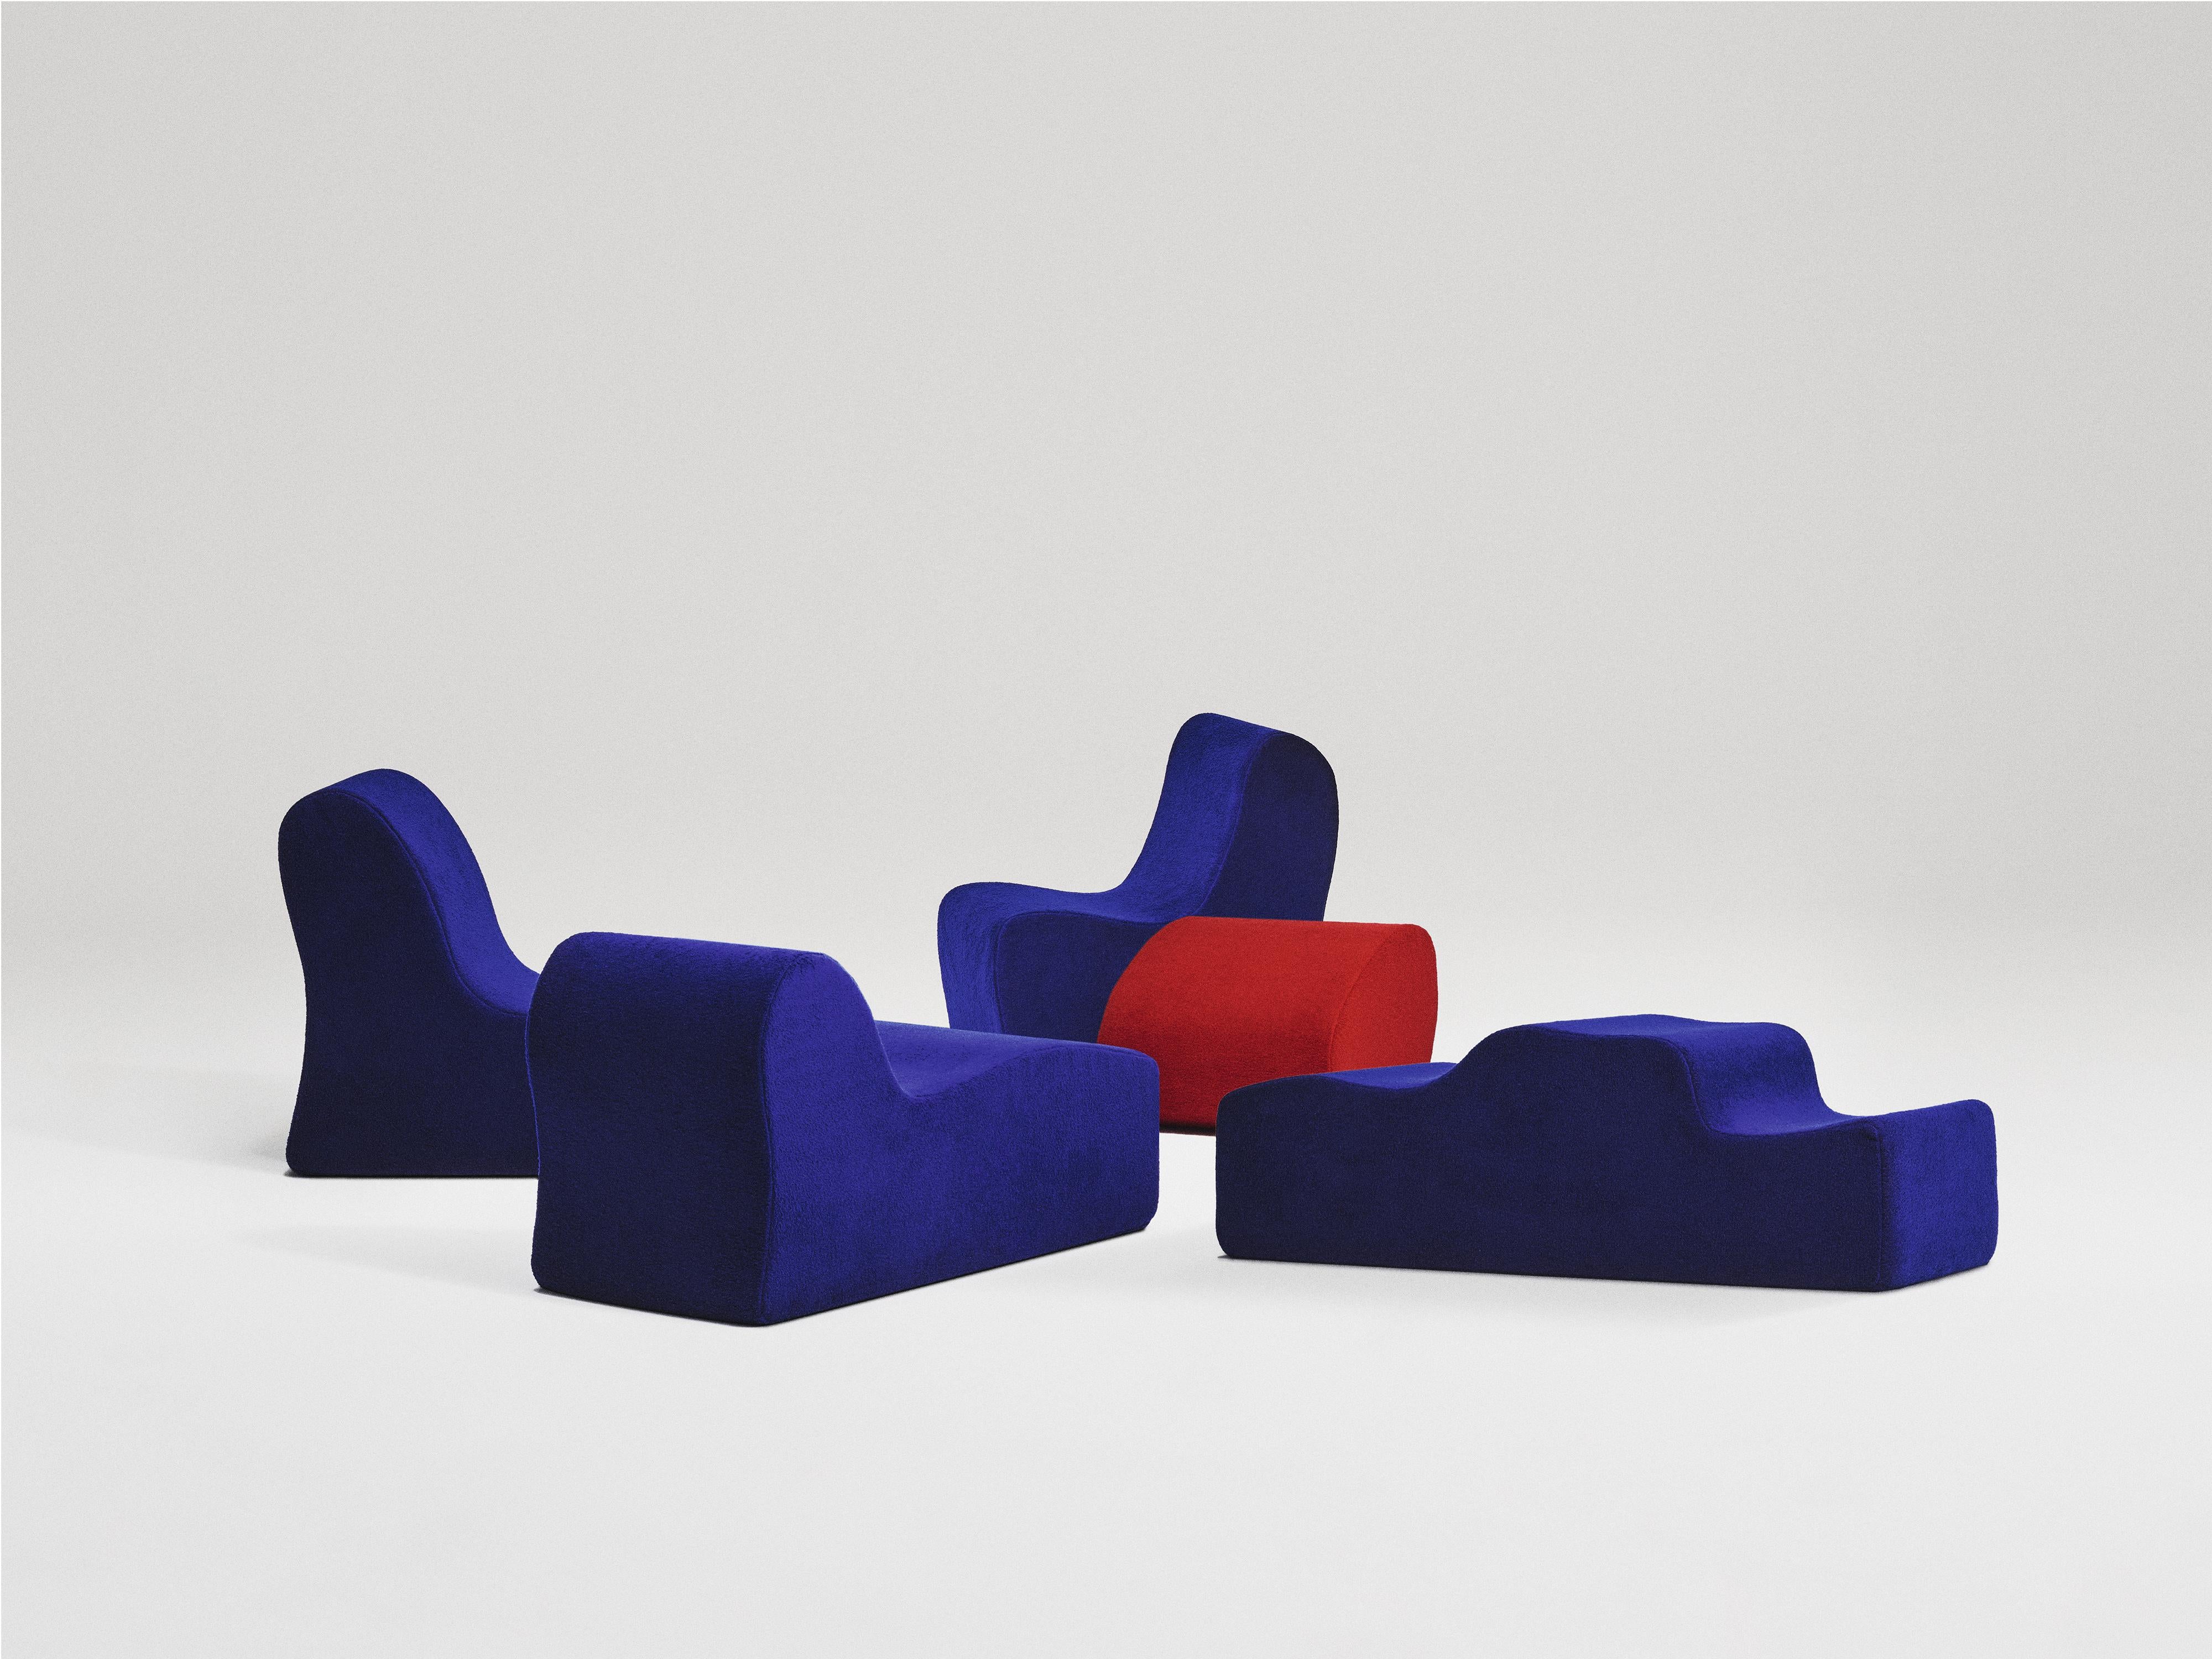 Mid-Century Modern Malitte Seating System by Roberto Matta Paradisoterrestre Edition For Sale